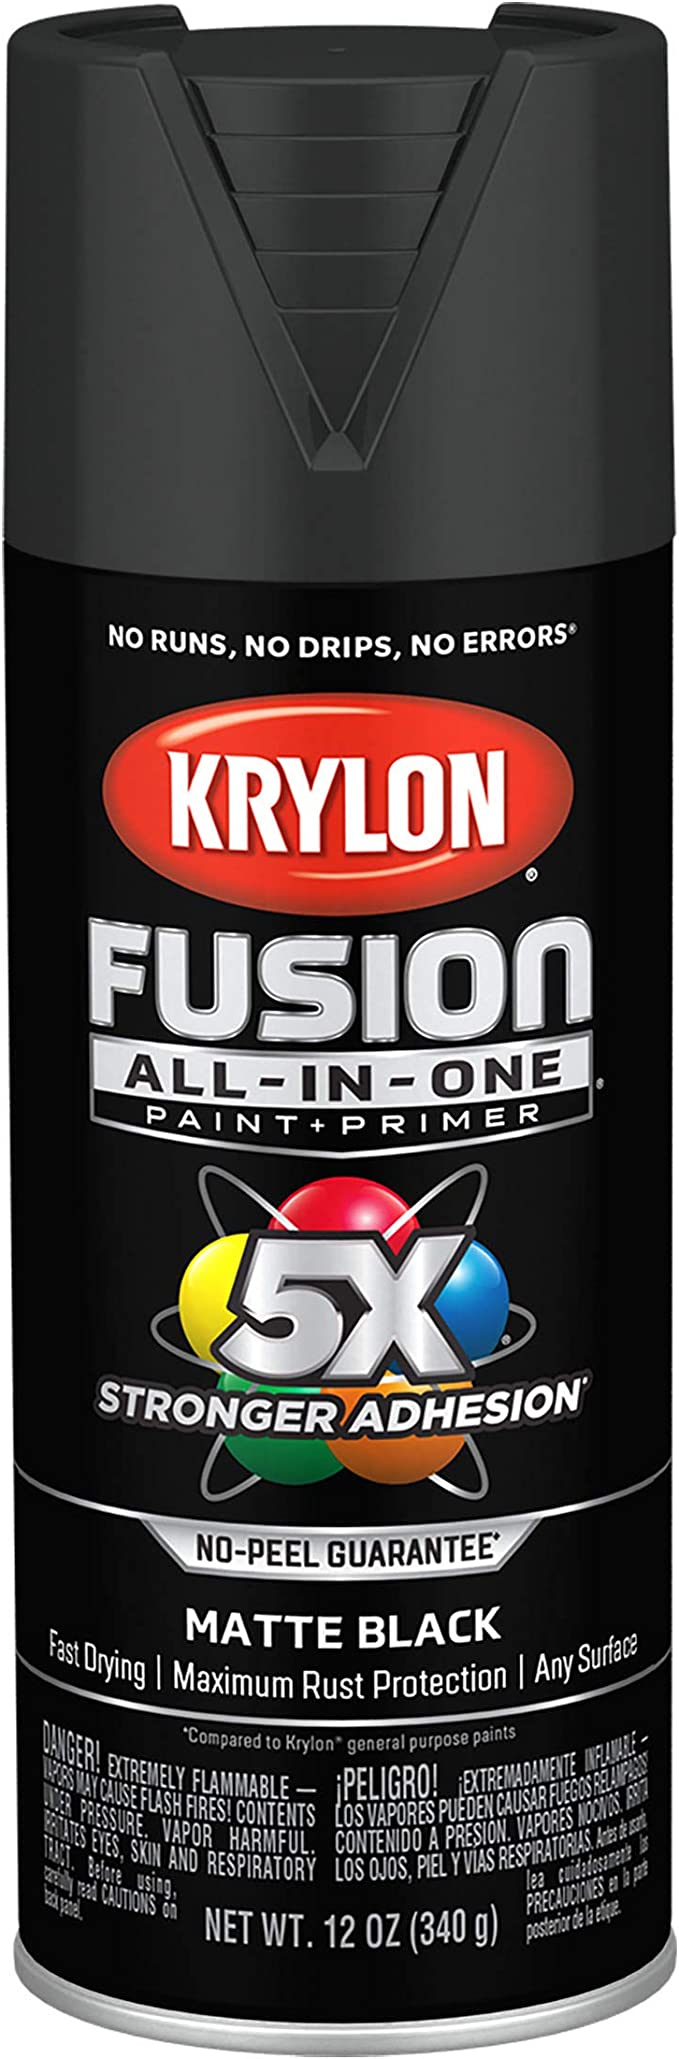 How Long Does Krylon Spray Paint Take To Dry?